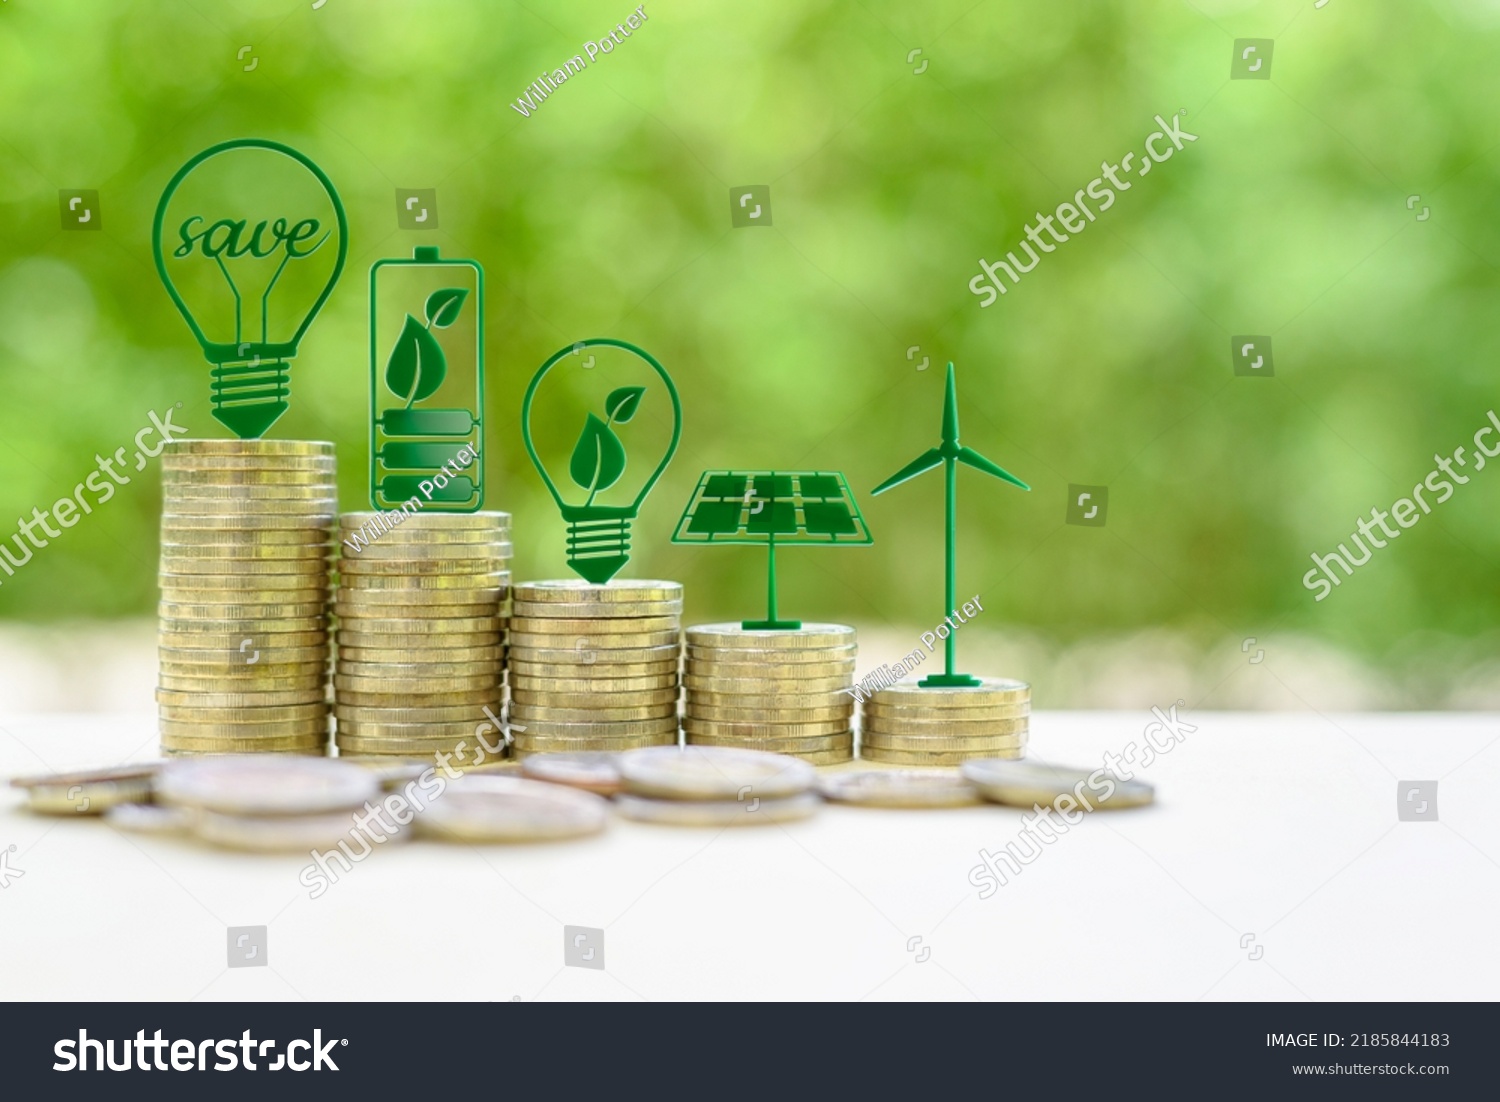 Alternative or renewable energy financing program, financial concept : Green eco-friendly or sustainable energy symbols atop five coin stacks e.g a light bulb, a rechargeable battery, solar cell panel #2185844183